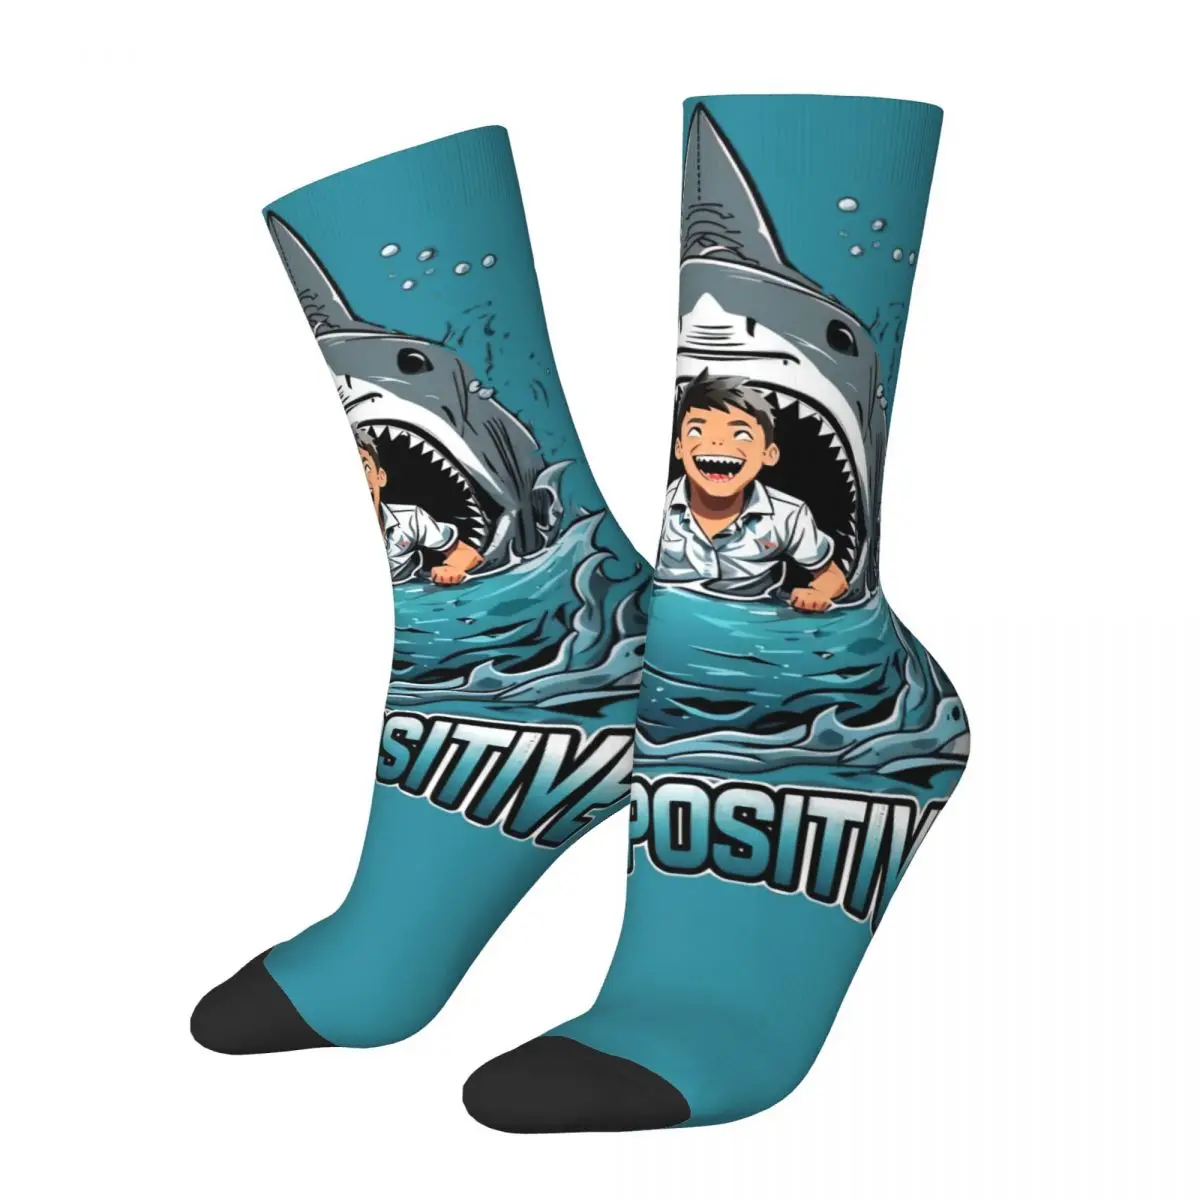 Stay Positive Shark And Boy Accessories Crew Socks Cozy Cute Funny Graphic Long Socks Cotton for Unisex Birthday Gifts Idea